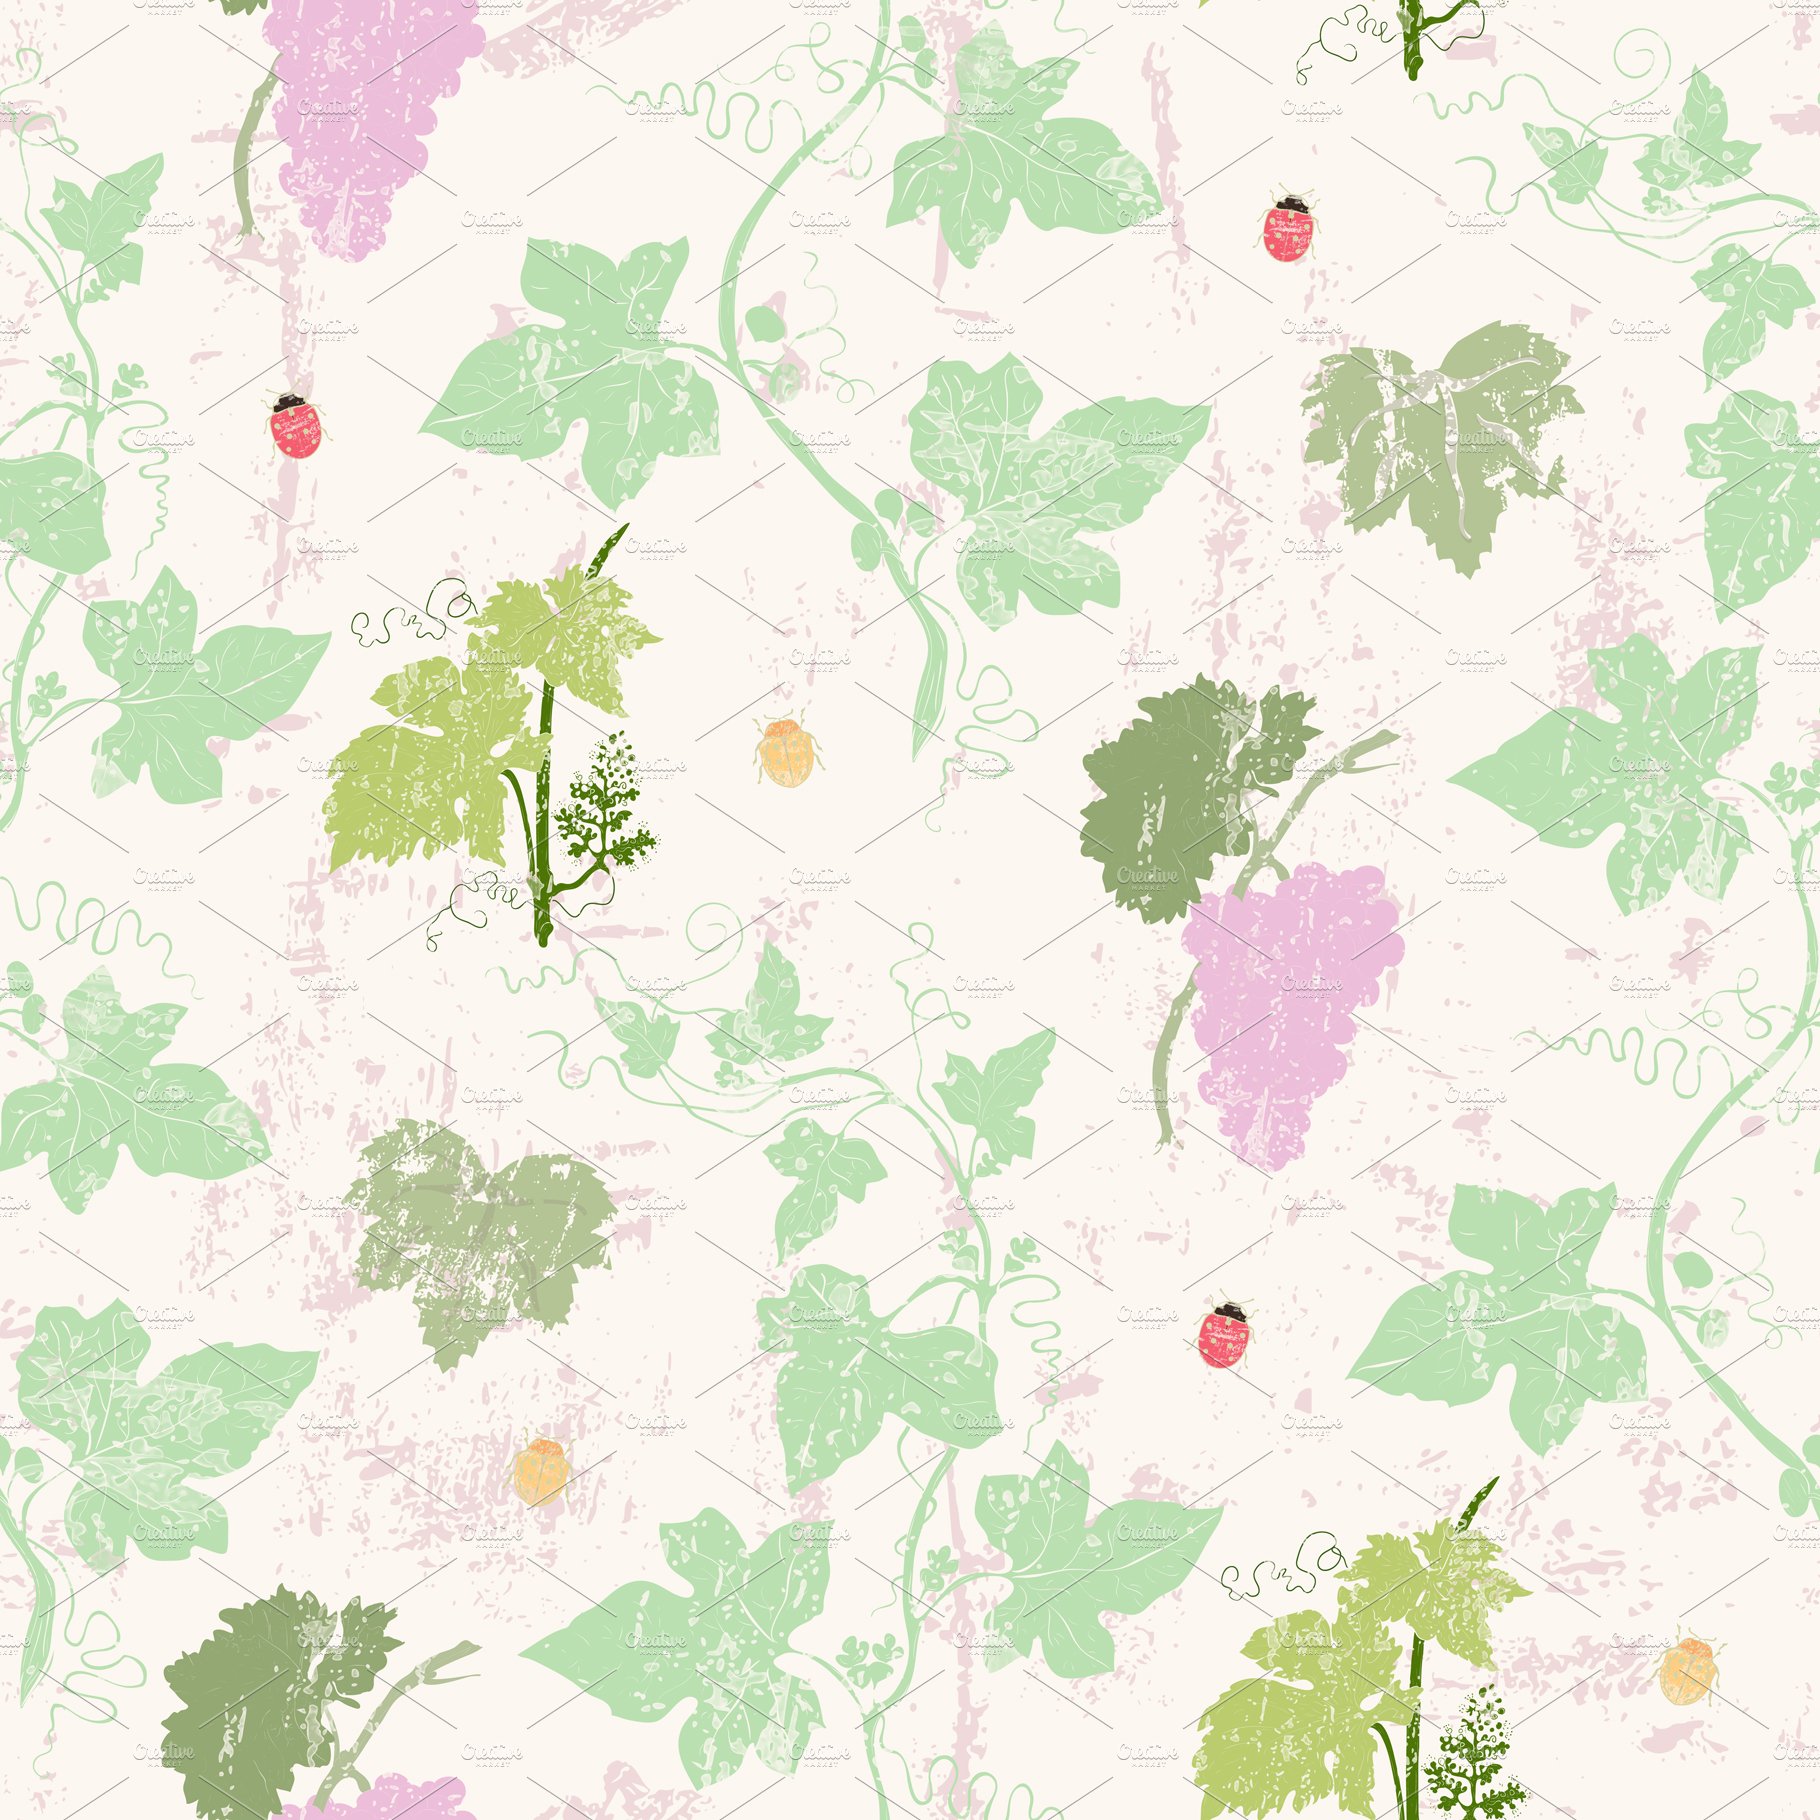 Grape and Vine seamless pattern preview image.